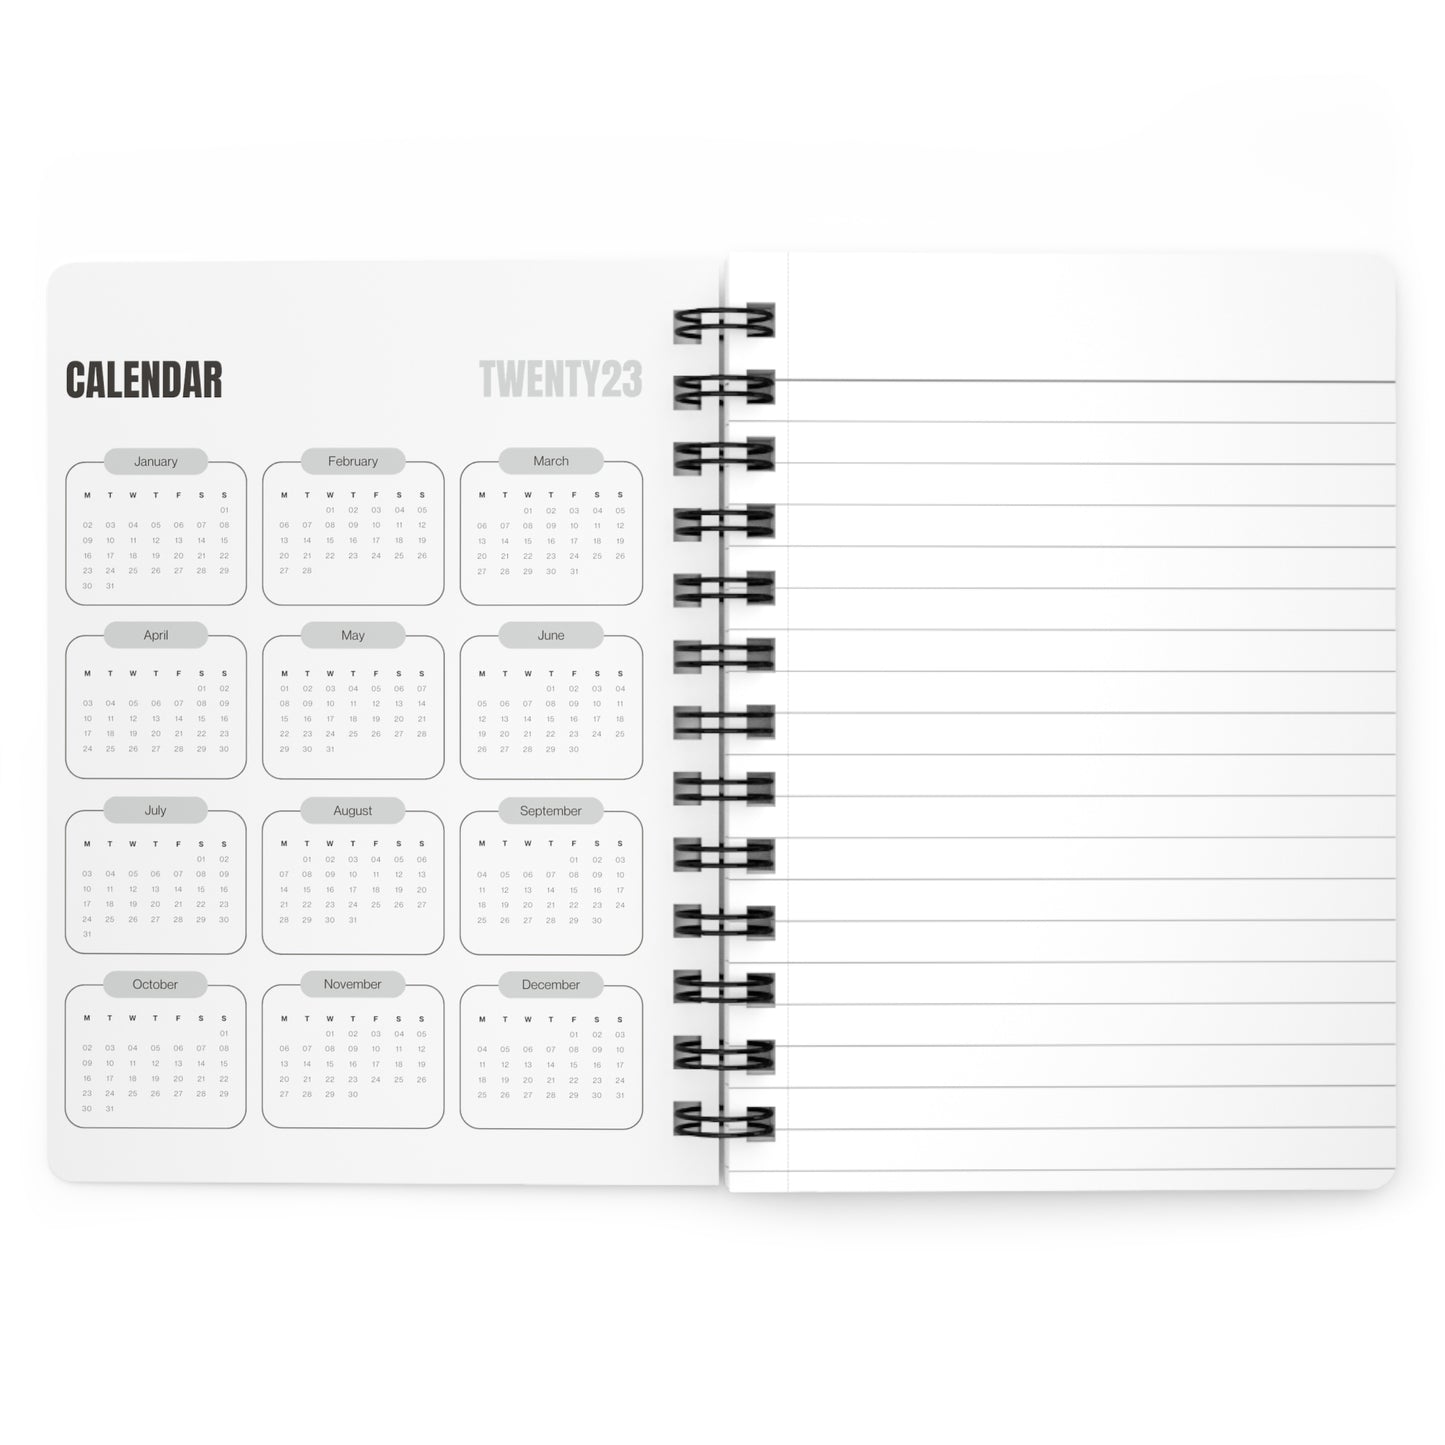 Immensely Spiral Bound Notebooks and Journals with 2023-2024 Year-at-a-Glance Calendar